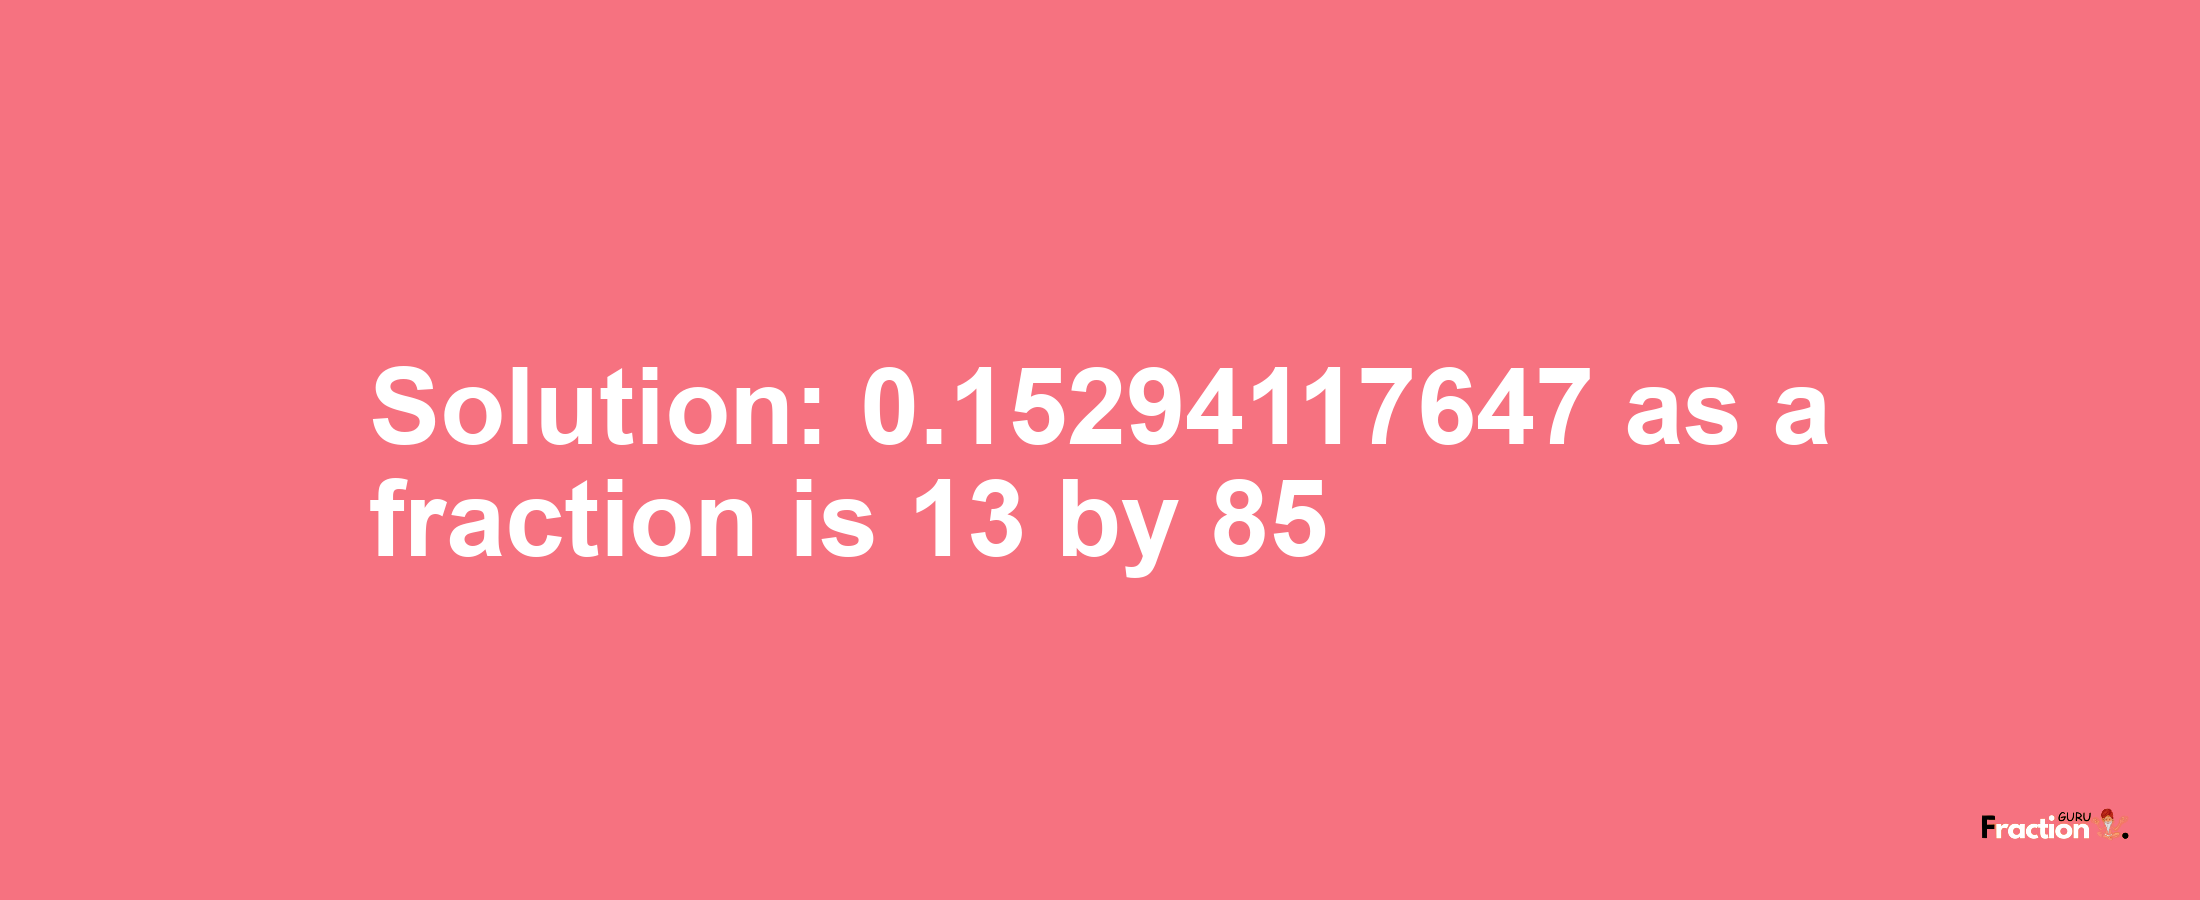 Solution:0.15294117647 as a fraction is 13/85